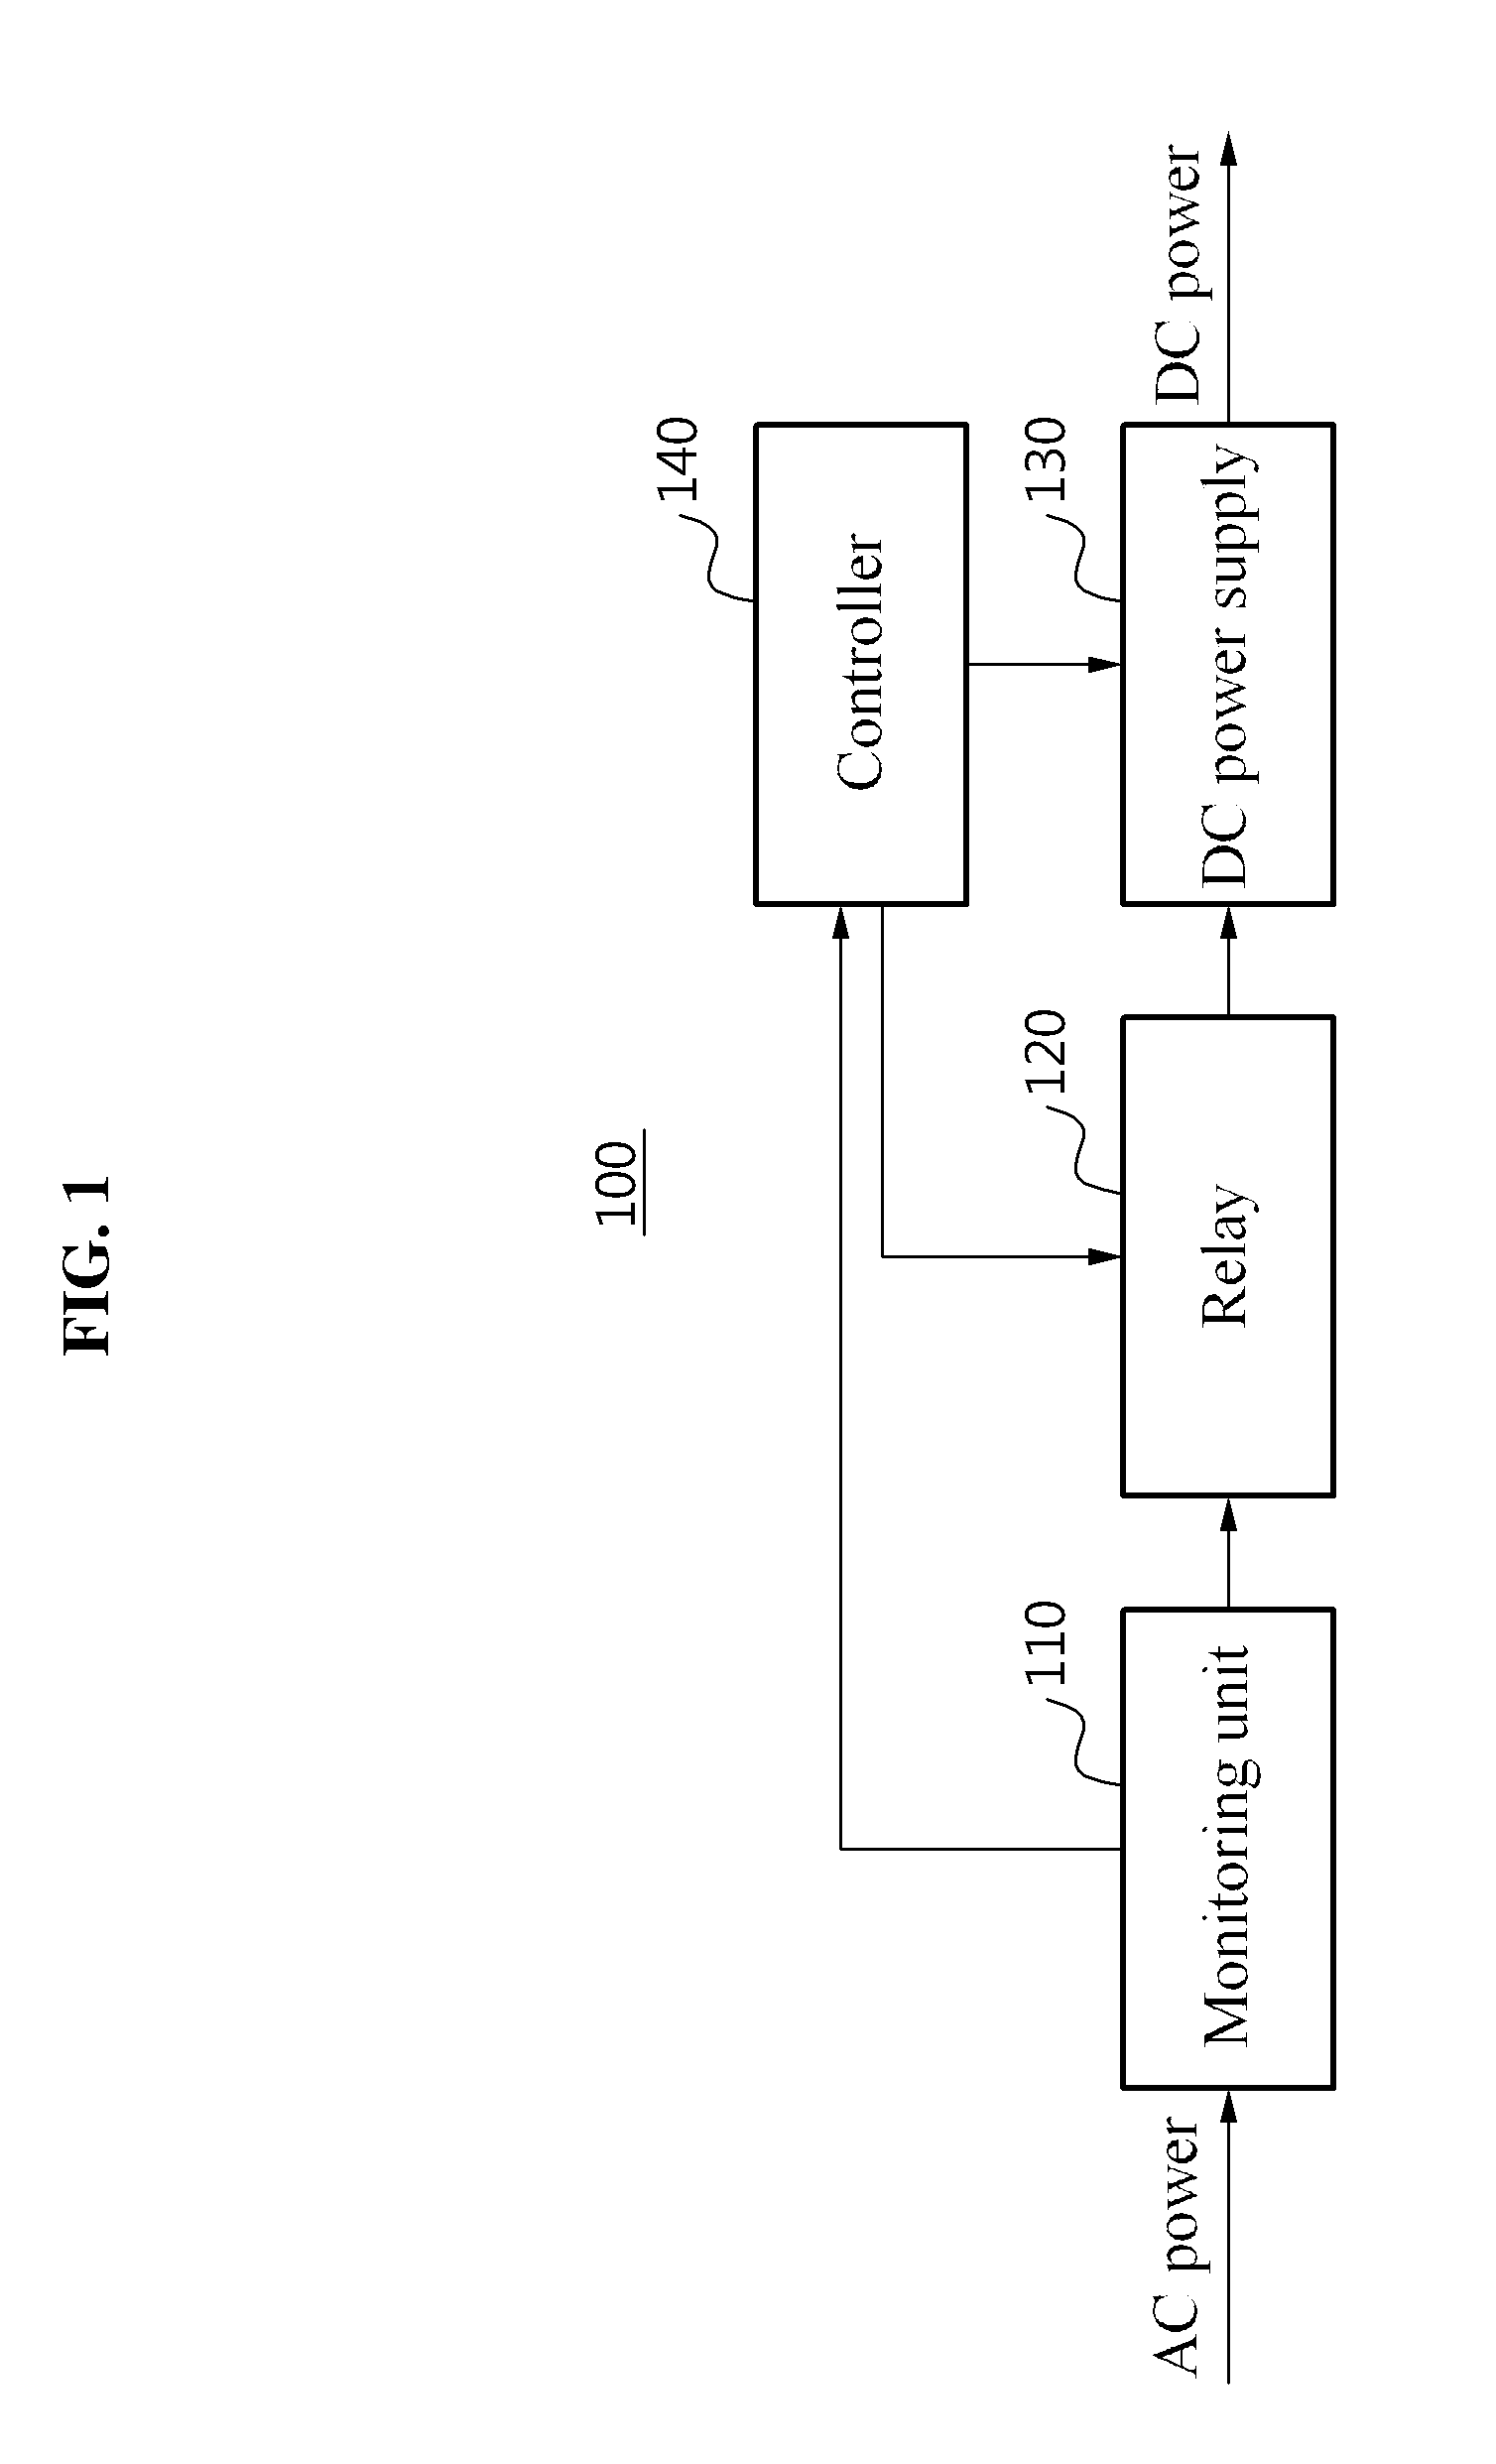 Highly efficient power supply unit and method for supplying power using same